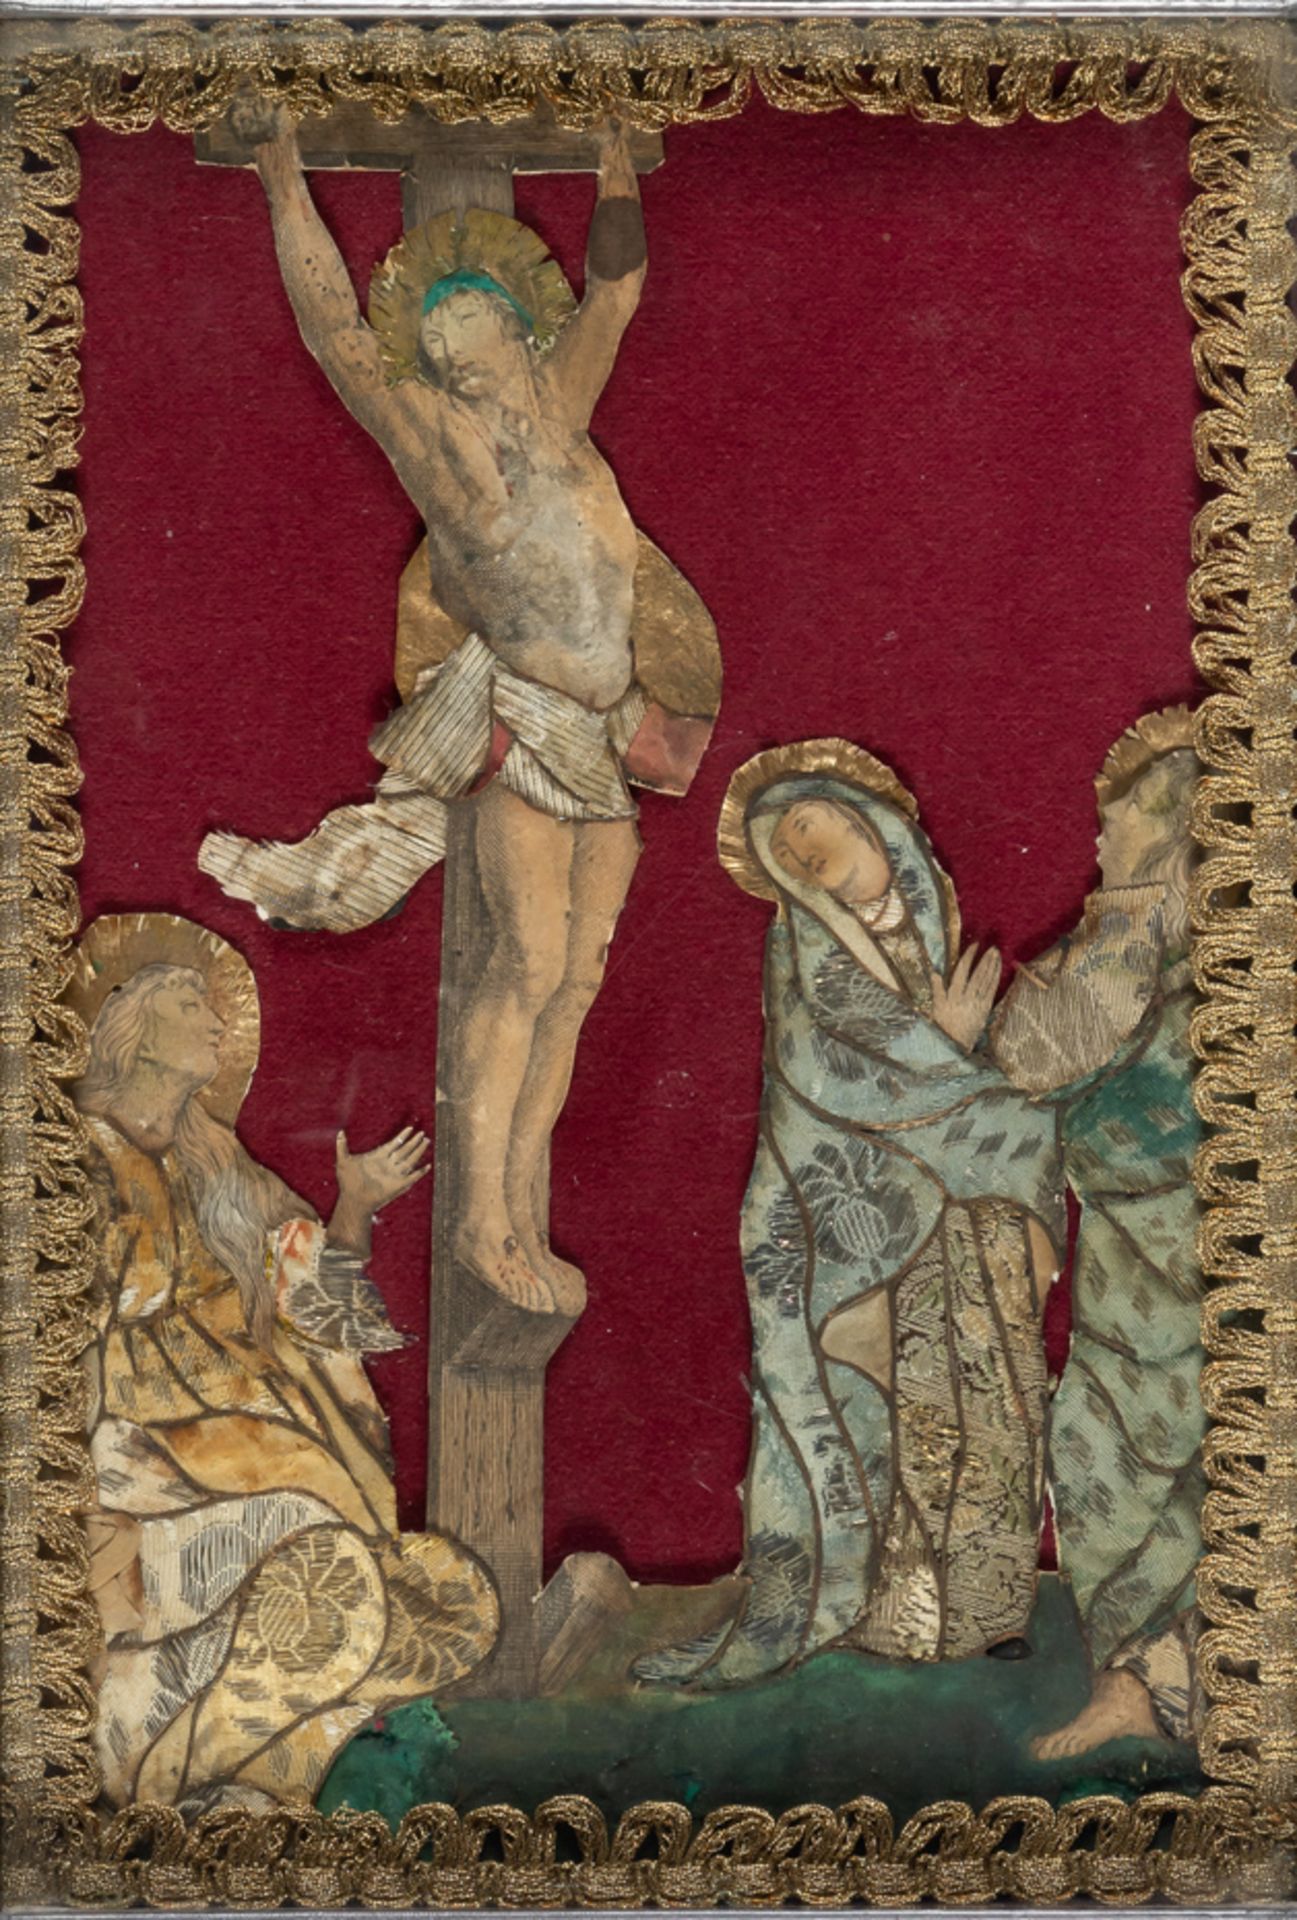 MONASTERY WORK SHOWING THE CRUCIFIXION OF CHRIST - Image 2 of 2